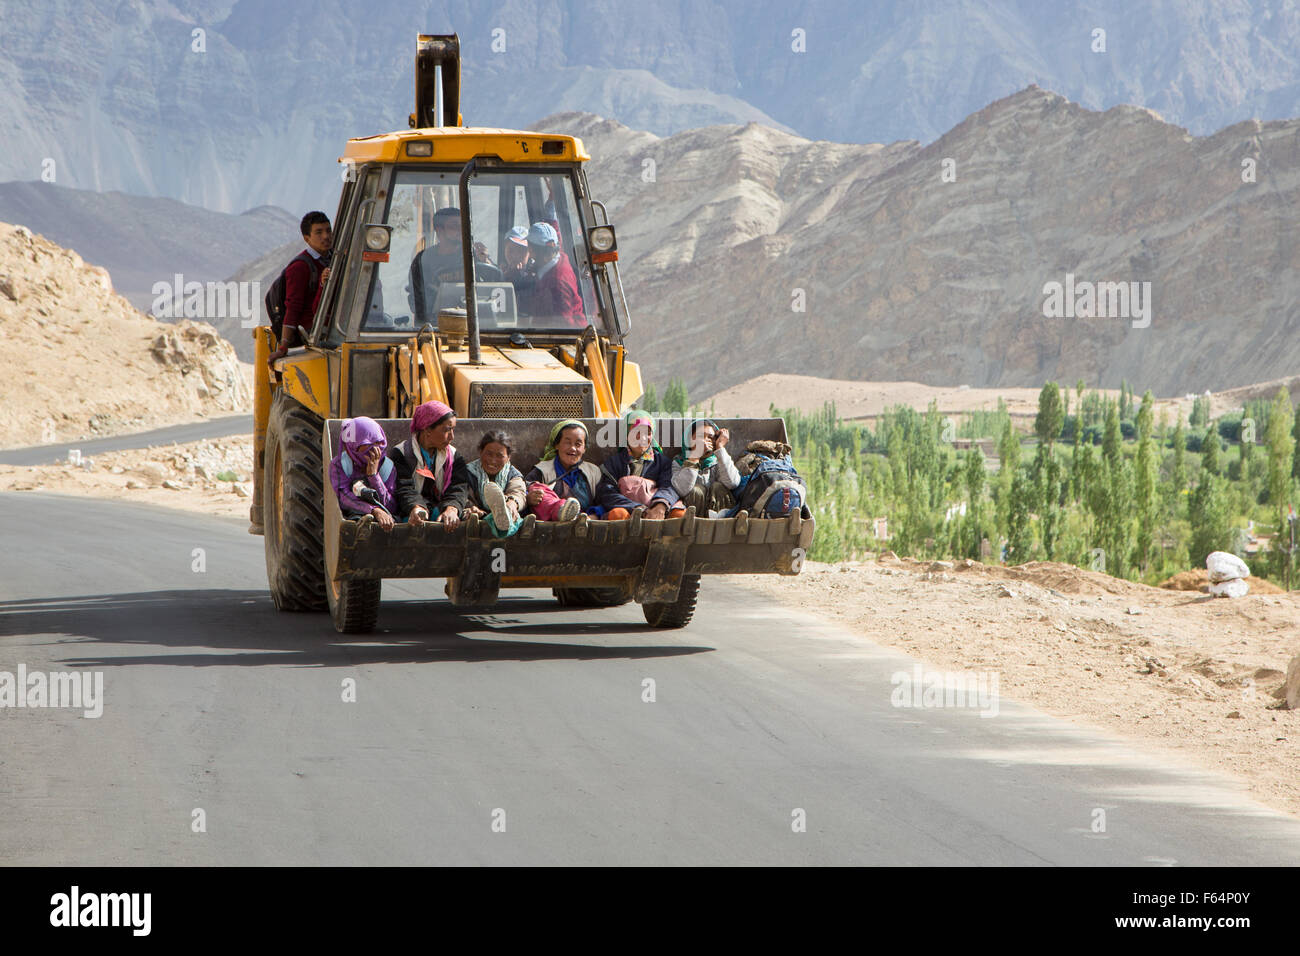 Leh, India - July 19 2014: Senior women using an earth moving machine as transport on the road in Ladakh, part of India Jammu & Stock Photo